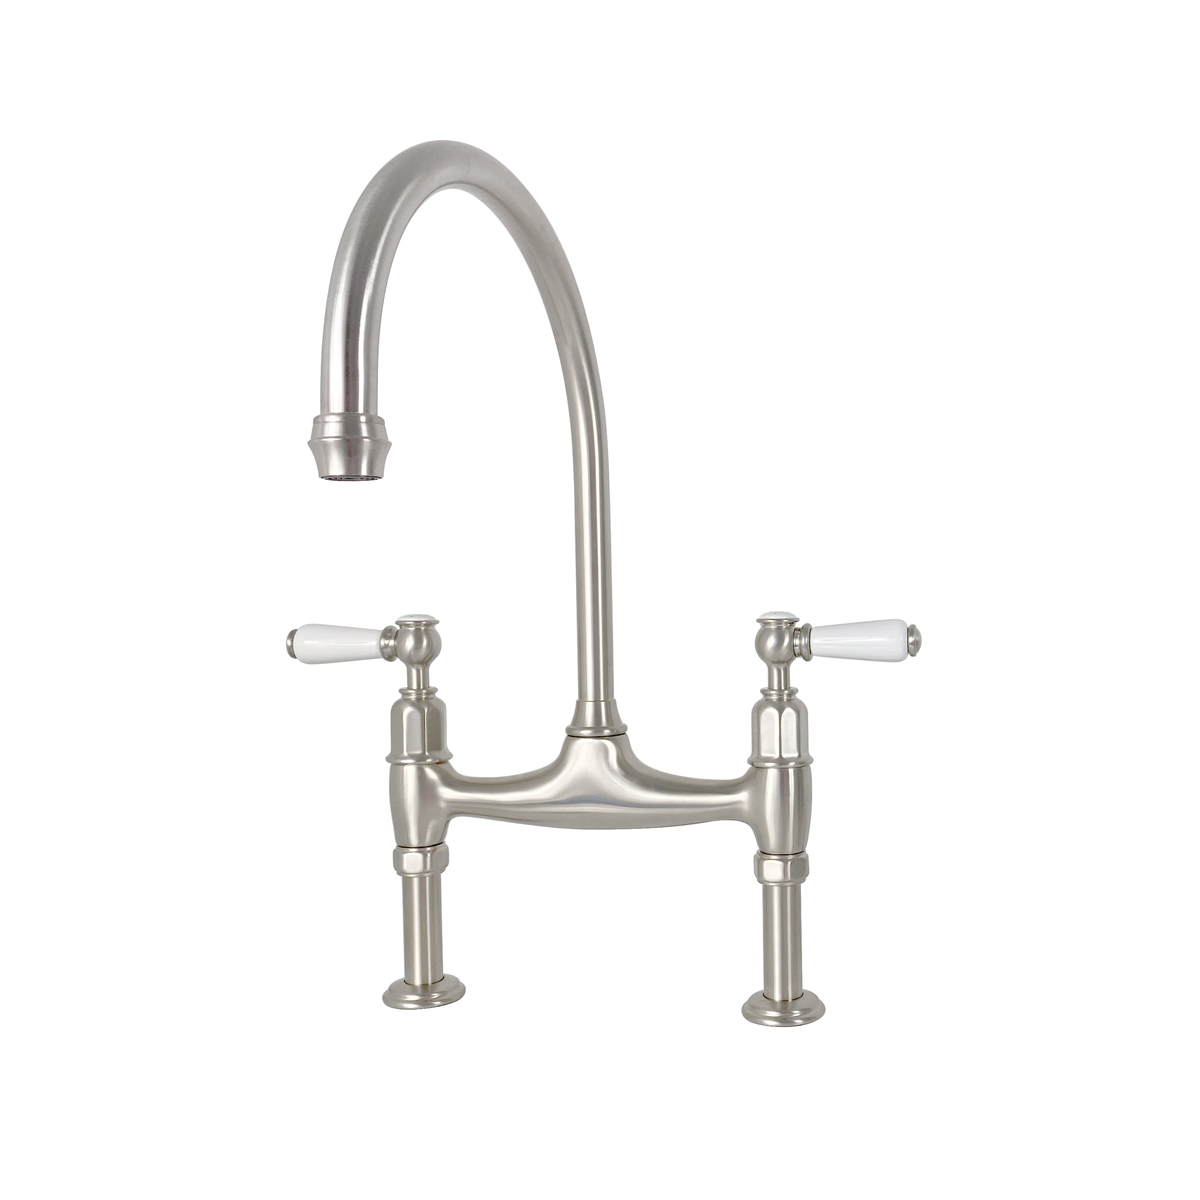 Shaws by Perrin & Rowe Pendleton bridge mixer in pewter. Ionian style kitchen tap with straight unions AUSH.4193. Distributed in Australia by Luxe by Design, Brisbane.